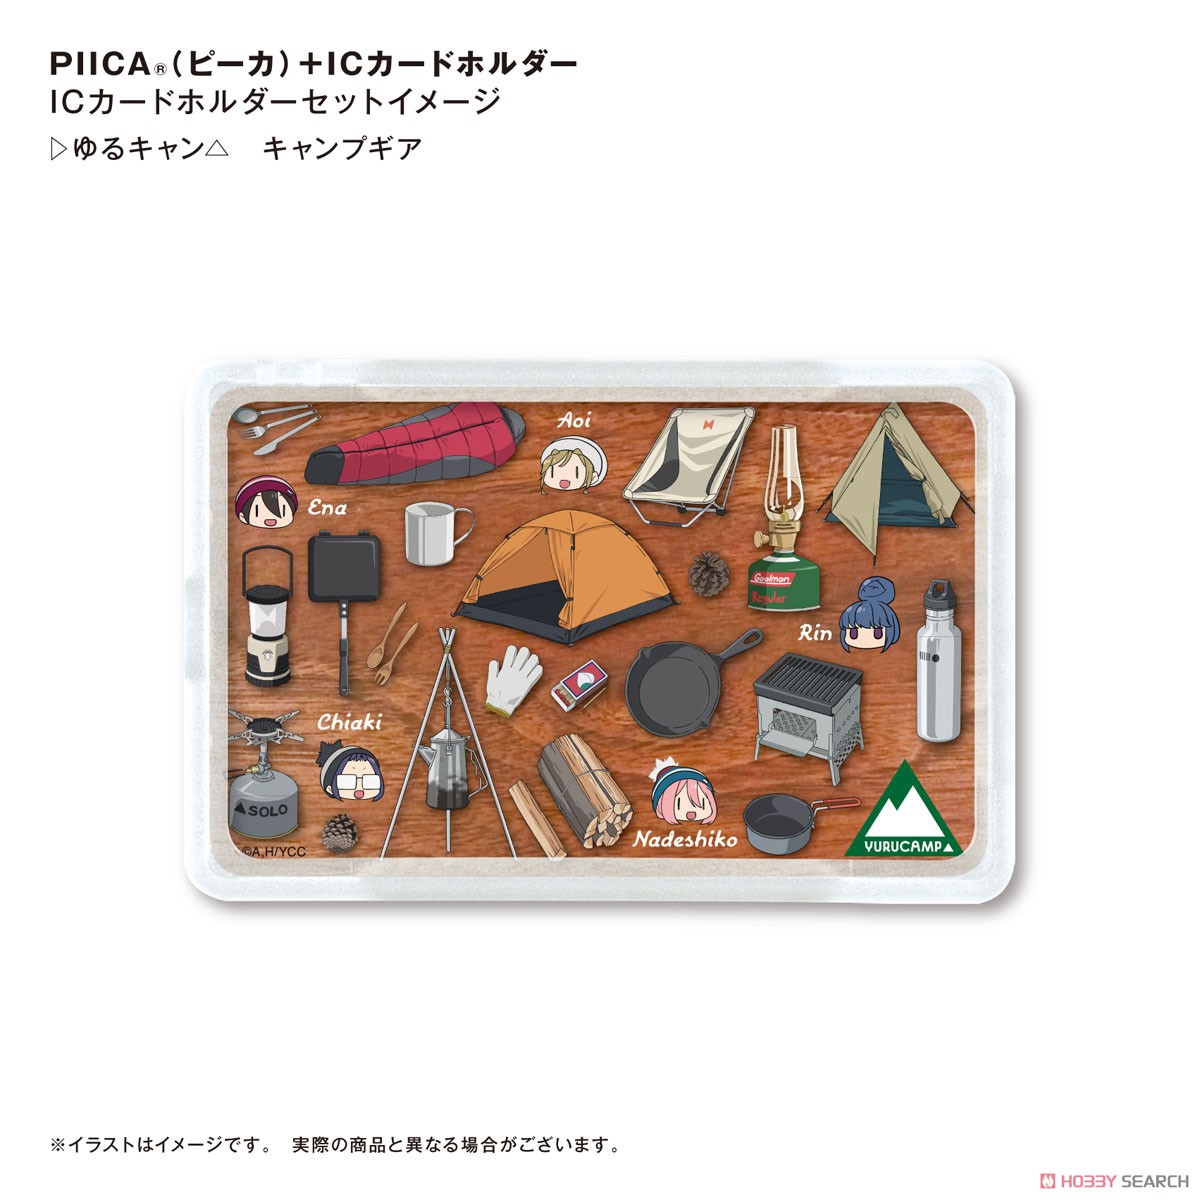 Yurucamp Camp Gear PIICA + IC Card Holder (Anime Toy) Item picture1